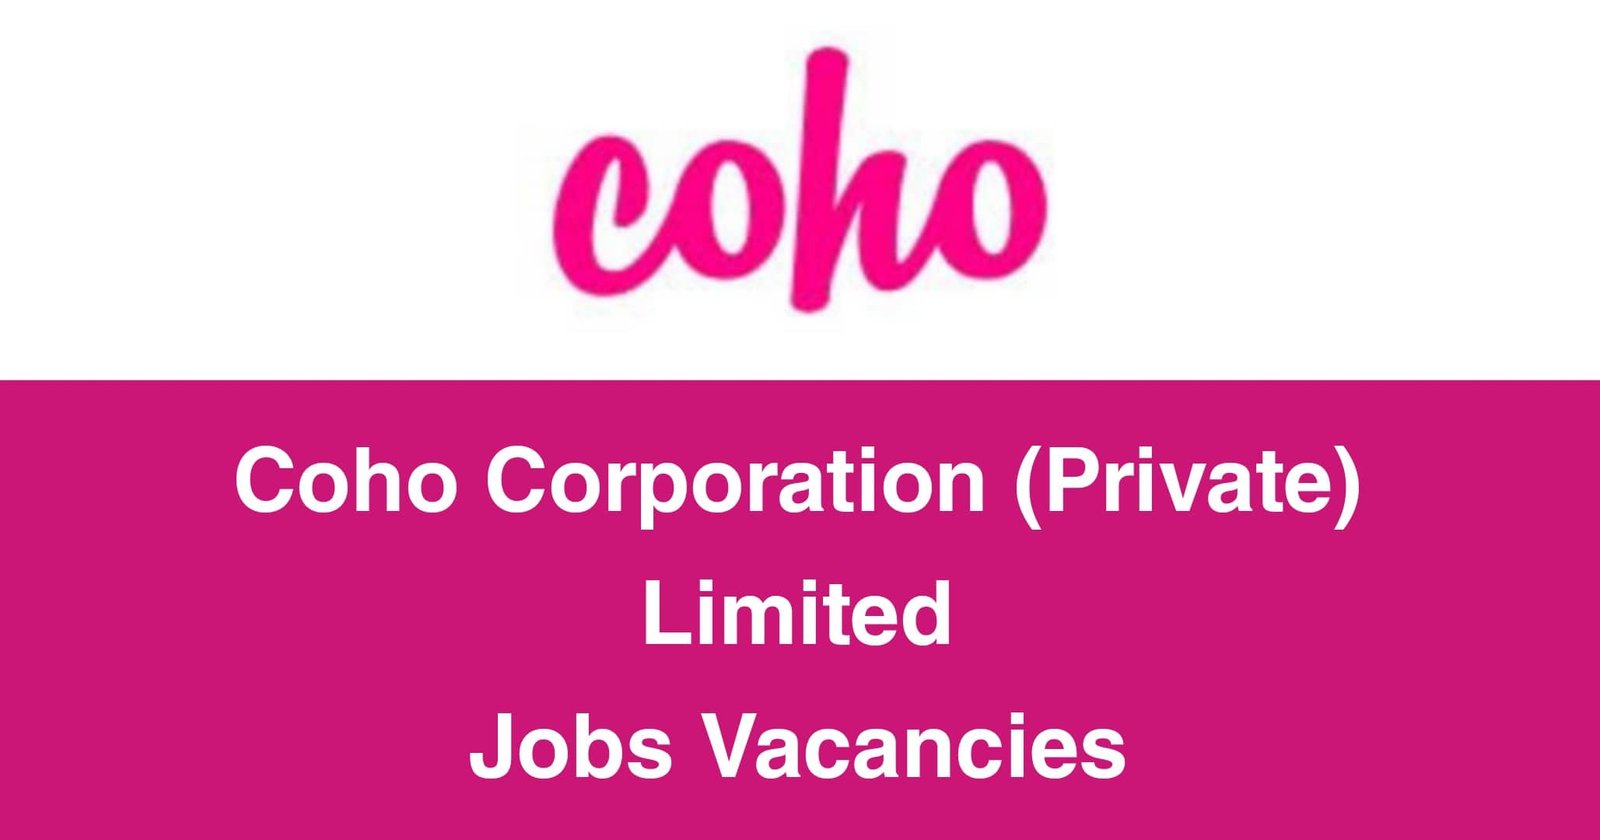 Coho Corporation (Private) Limited Jobs Vacancies